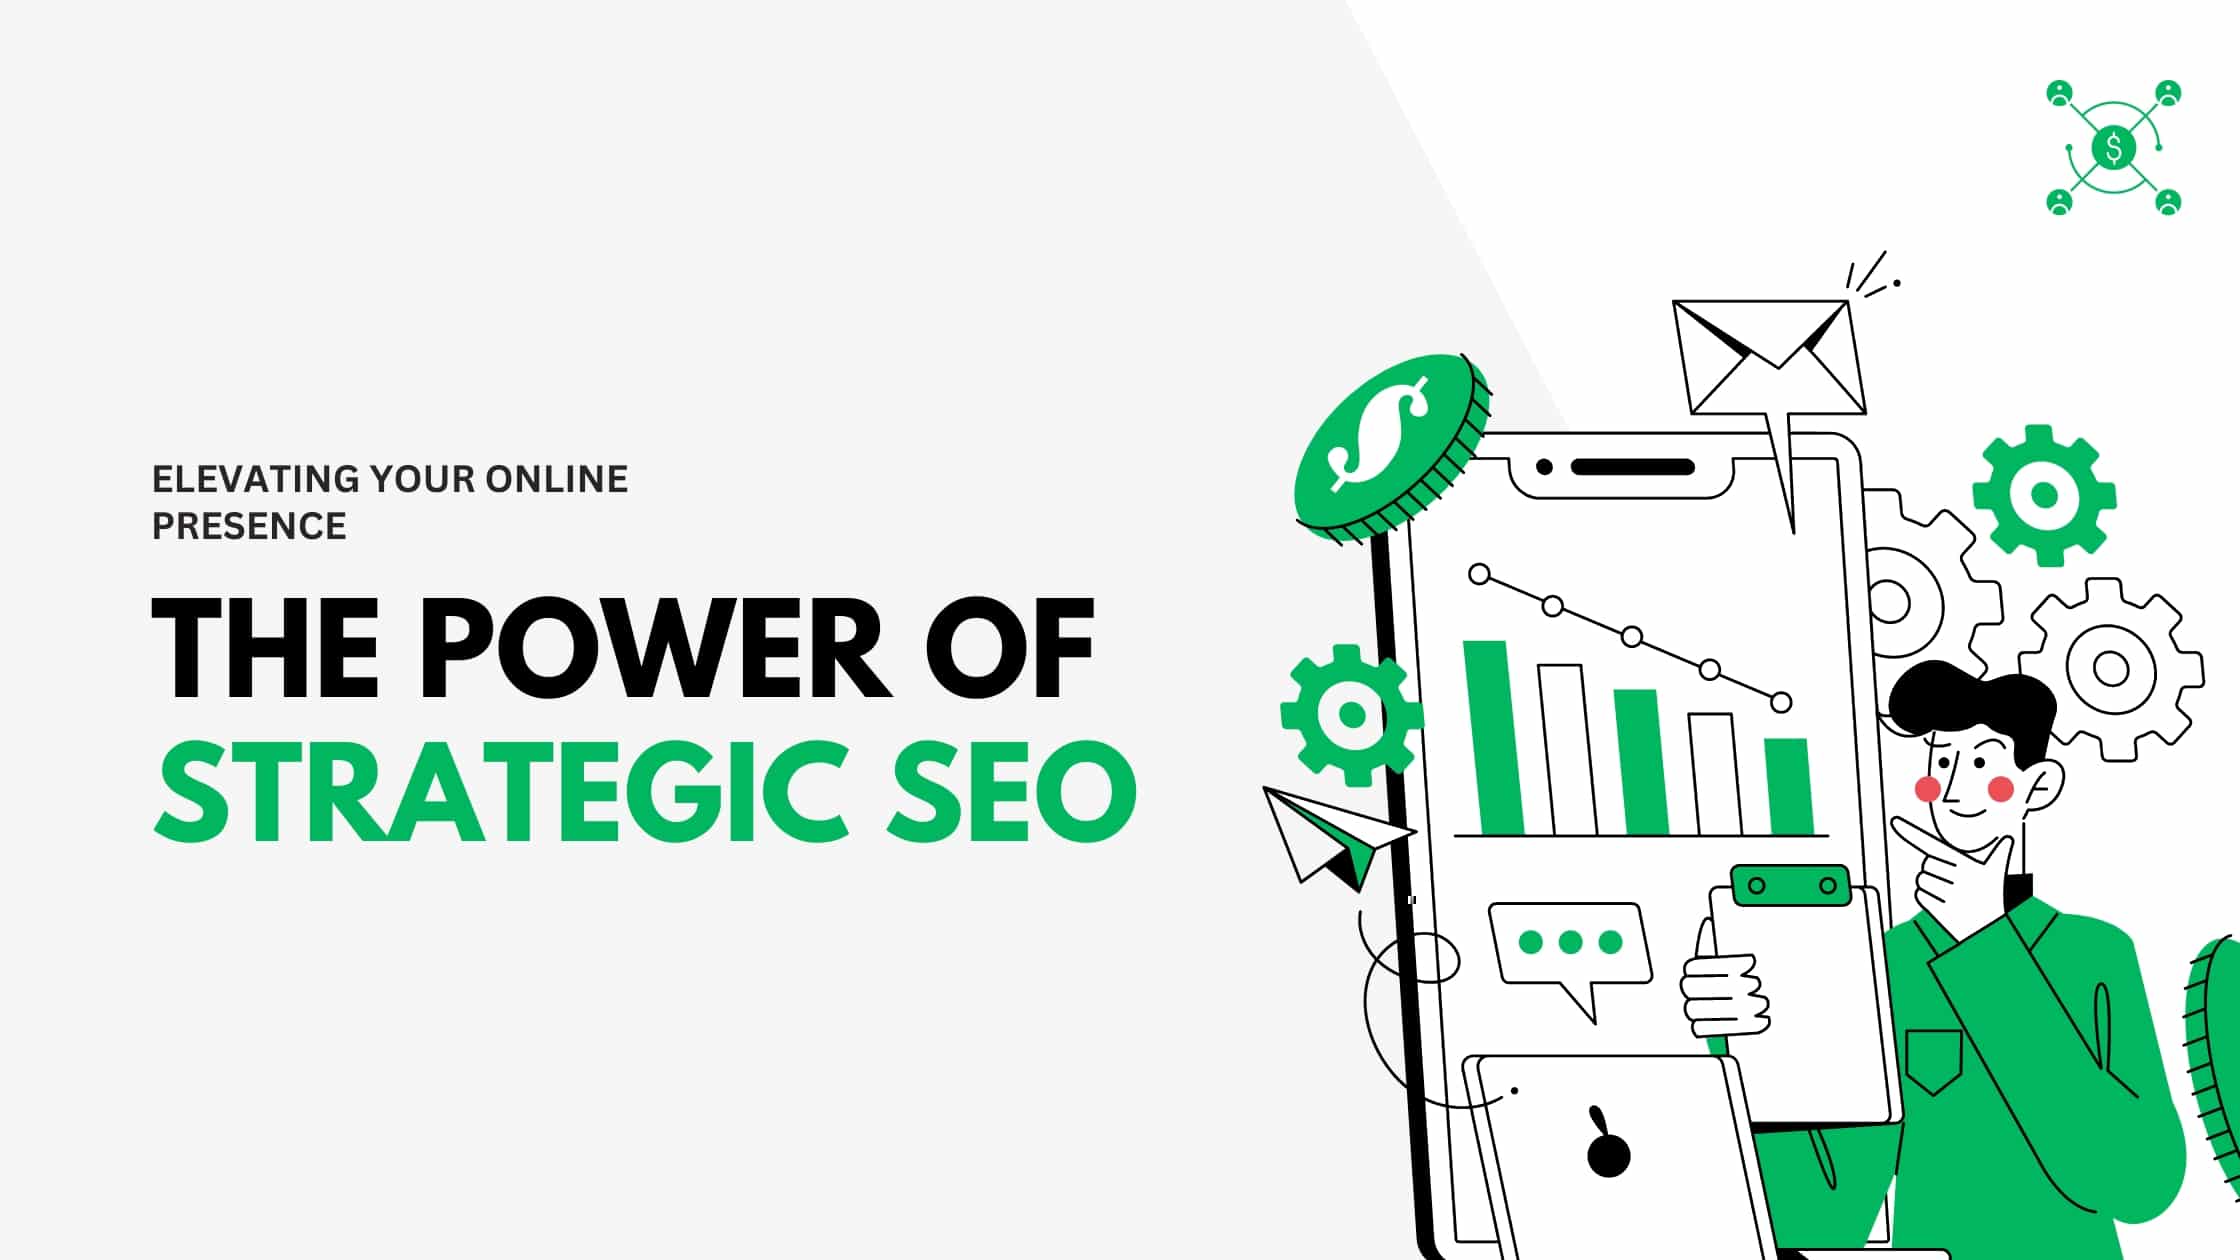 Elevating Your Online Presence: The Power of Strategic SEO